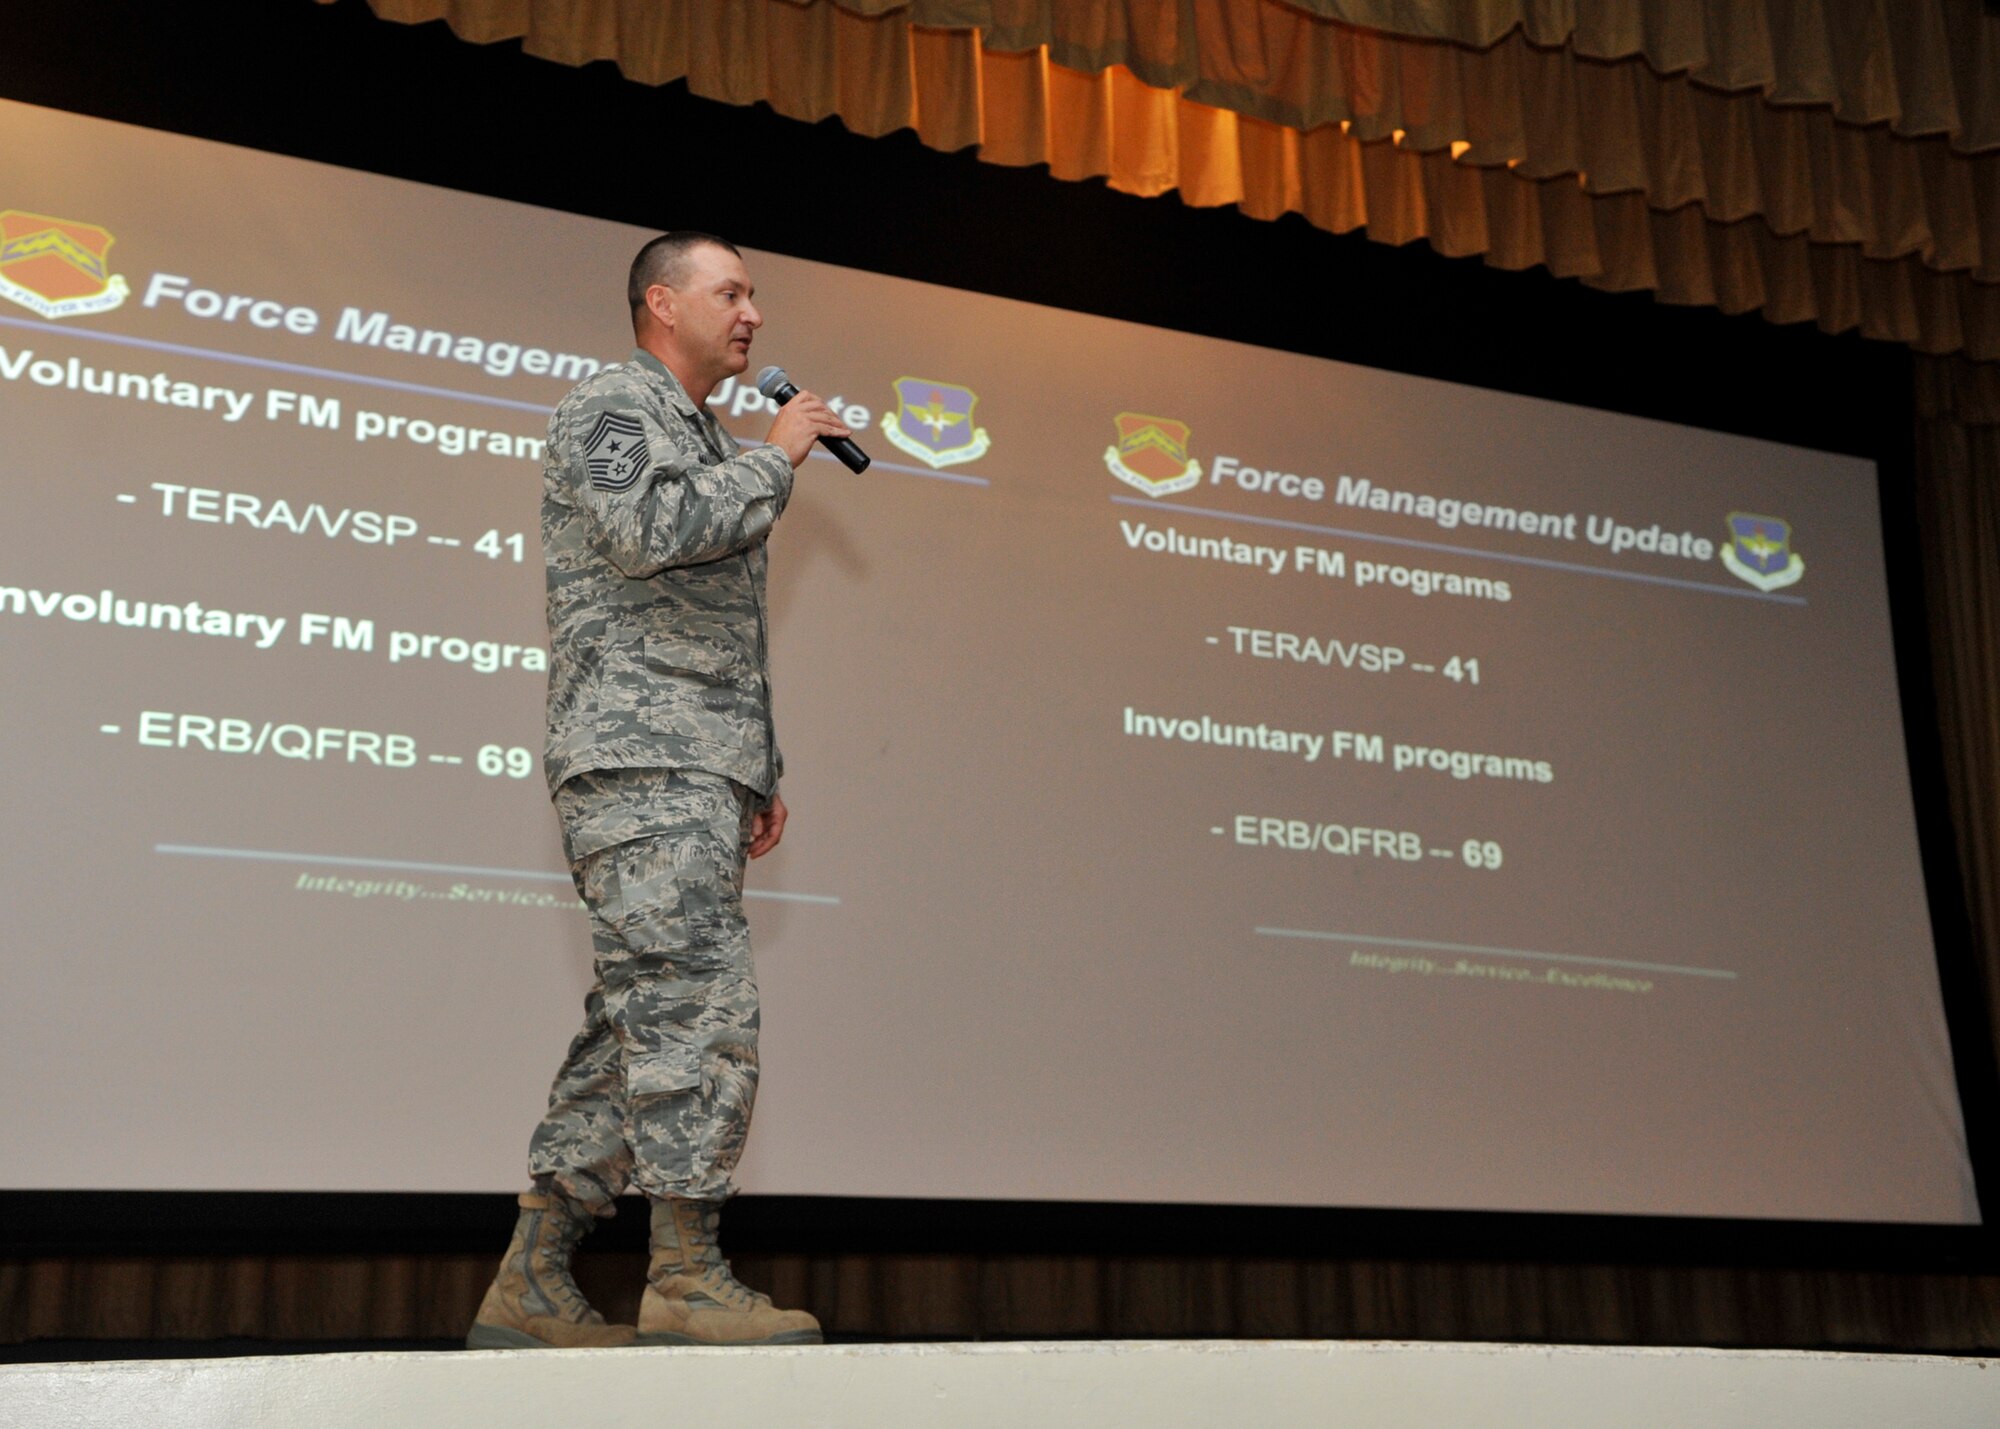 Chief Master Sgt. John Mazza, 56th Fighter Wing command chief, speaks to the crowd during Brig. Gen. Scott Pleus’, 56th FW commander, first commander’s call Monday at Luke Air Force Base. Mazza covered force management, enlisted performance reviews and developmental special duty assignments. (U.S. Air Force photo/Senior Airman Marcy Copeland)